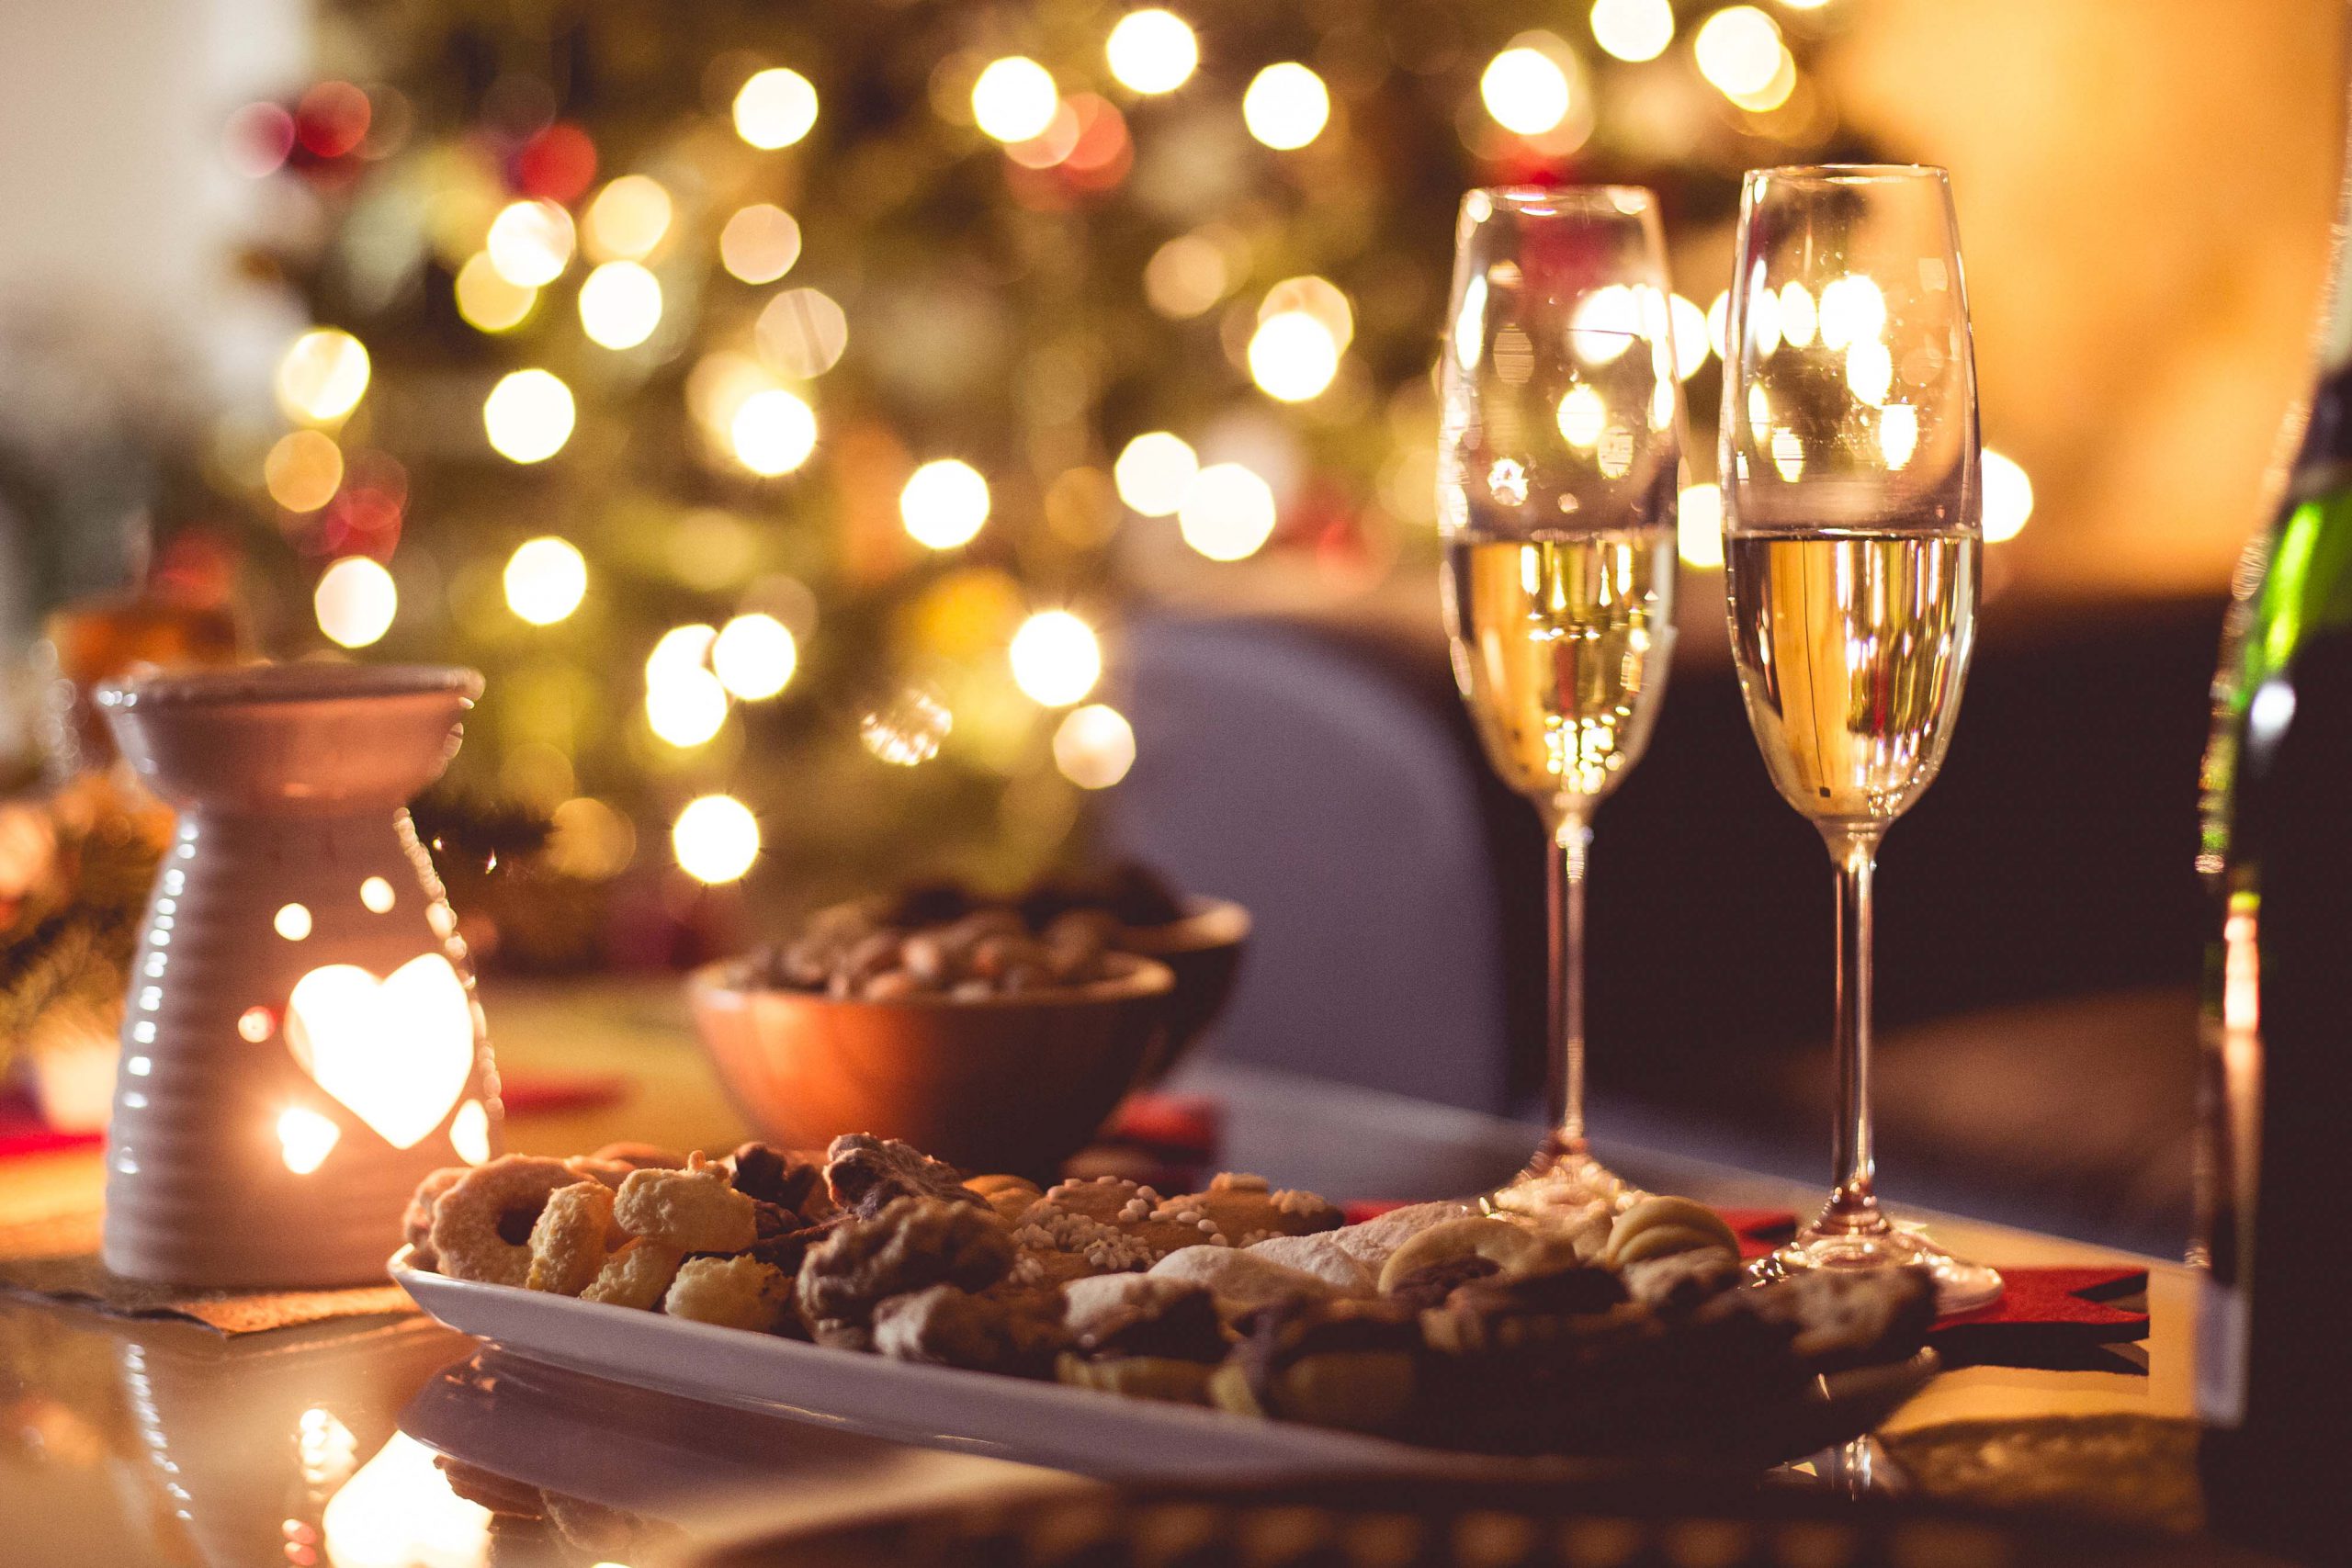 holiday image of food and wine